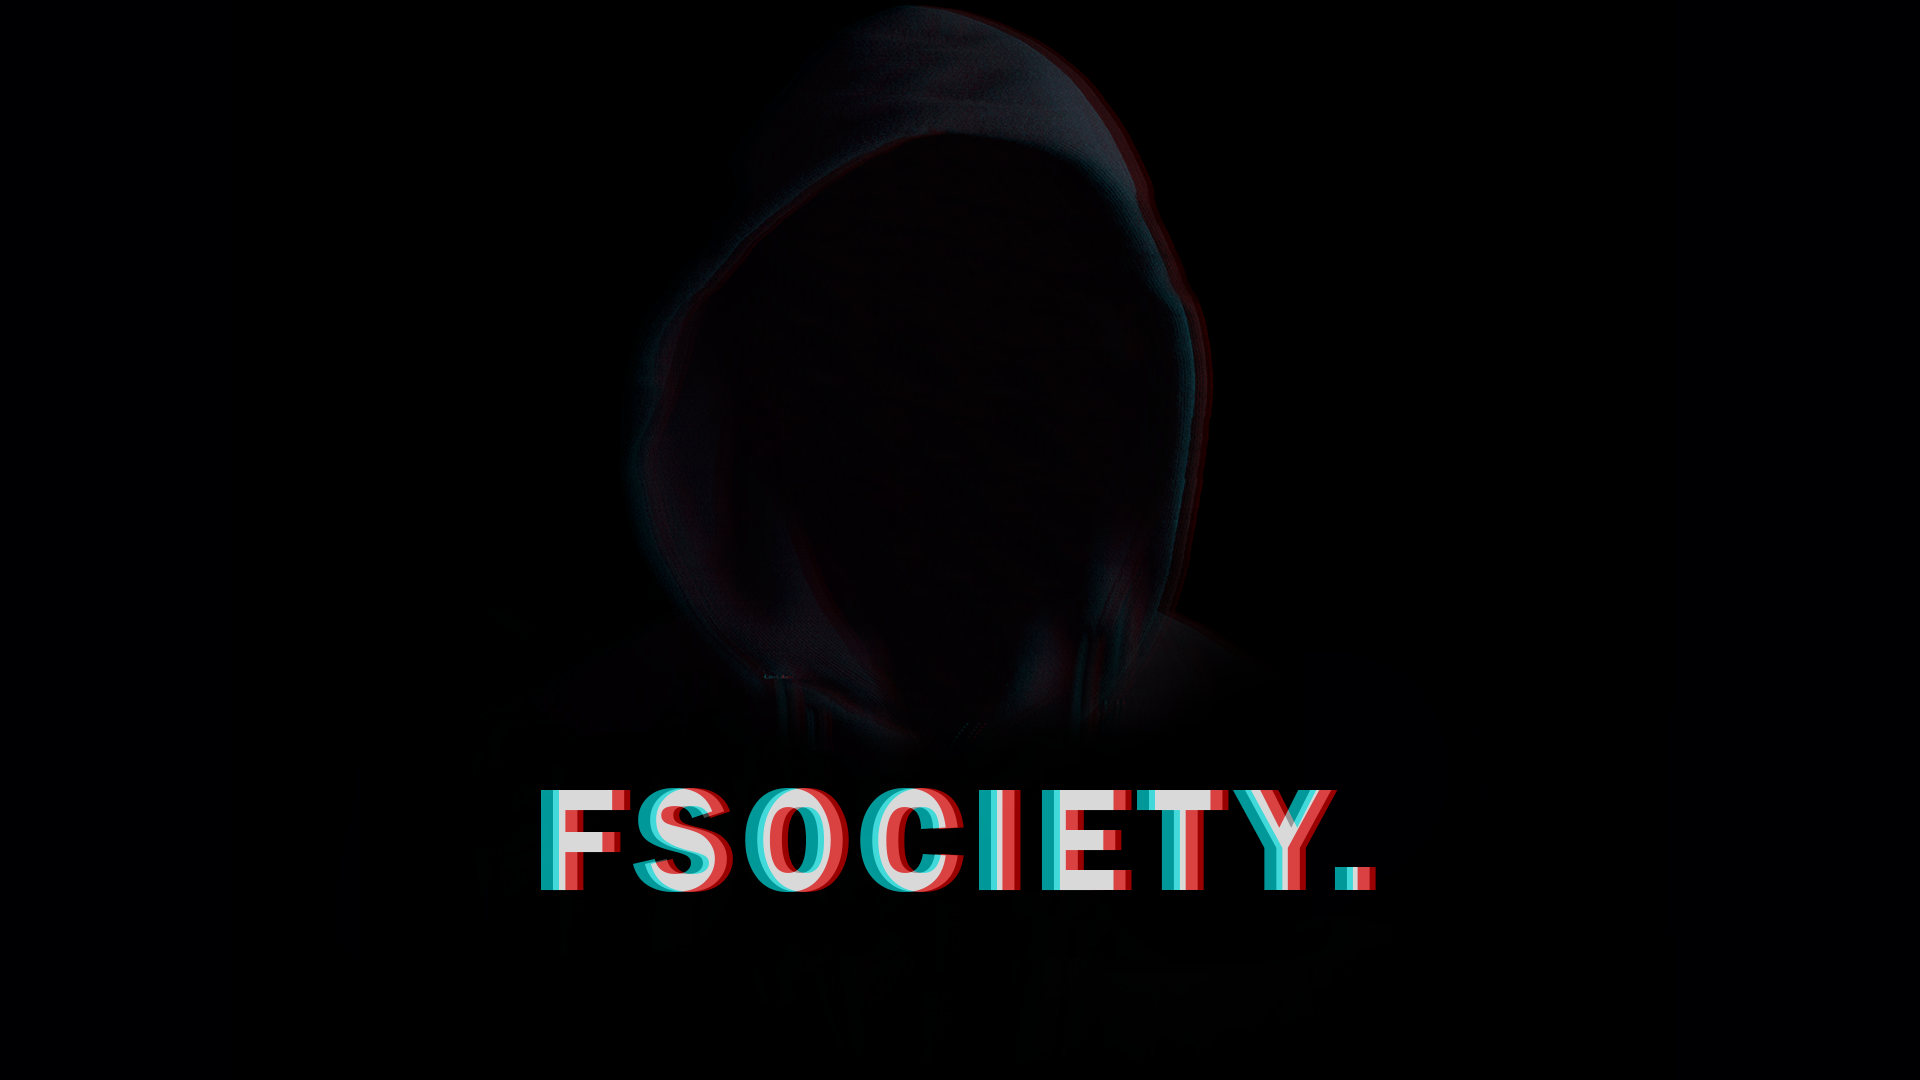 F Society Wallpaper HD Backgrounds